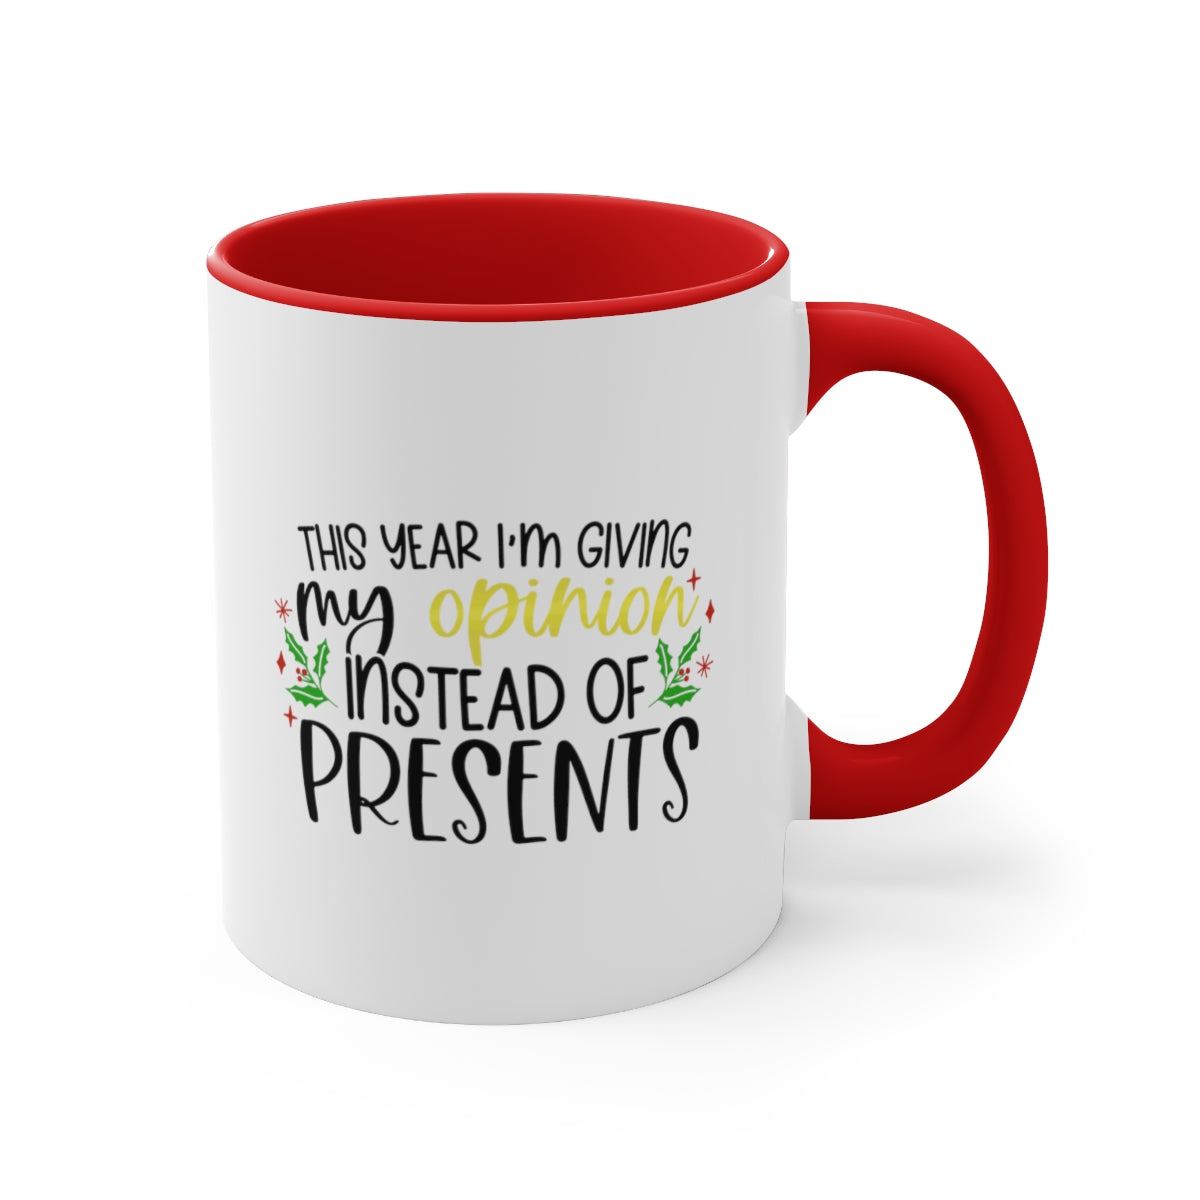 This Year I’m Giving My Opinion Instead of Presents | Christmas Coffee Mug